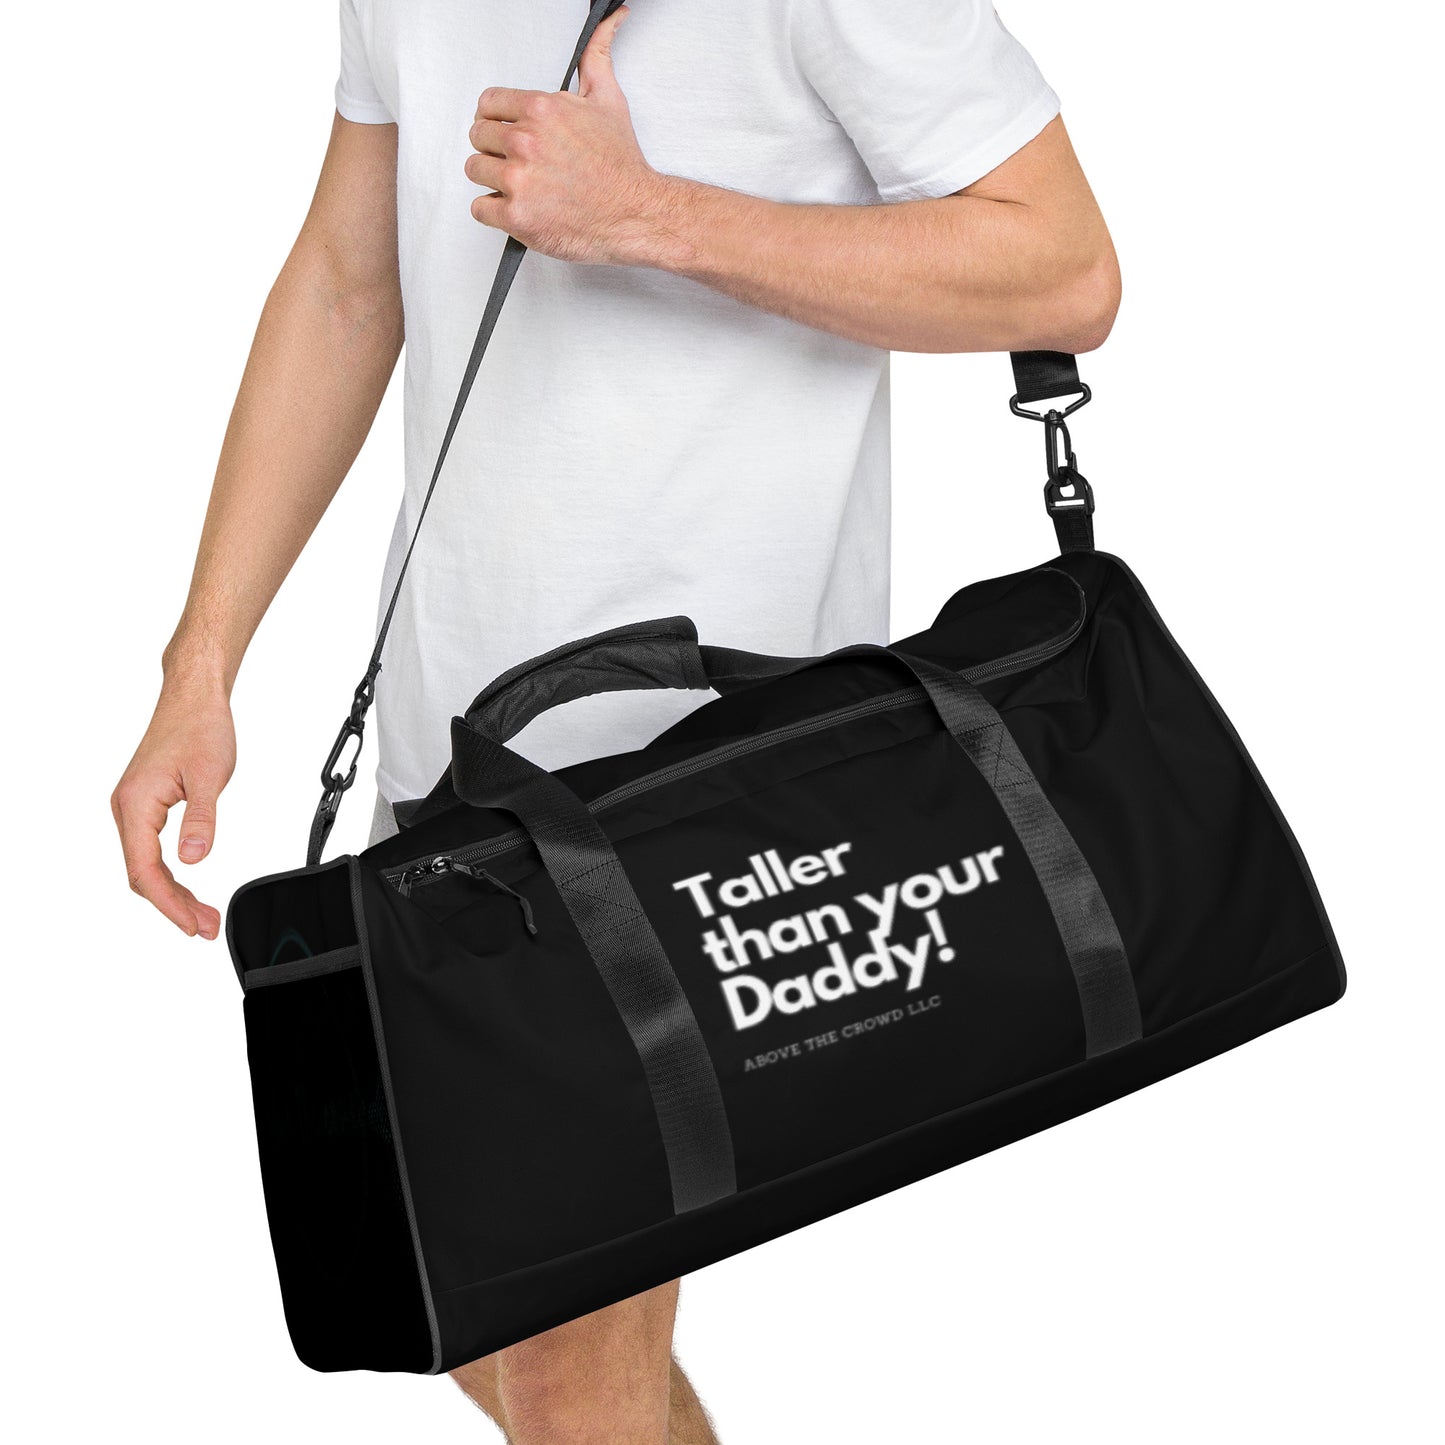 Black 'Taller than your Daddy' Duffle bag